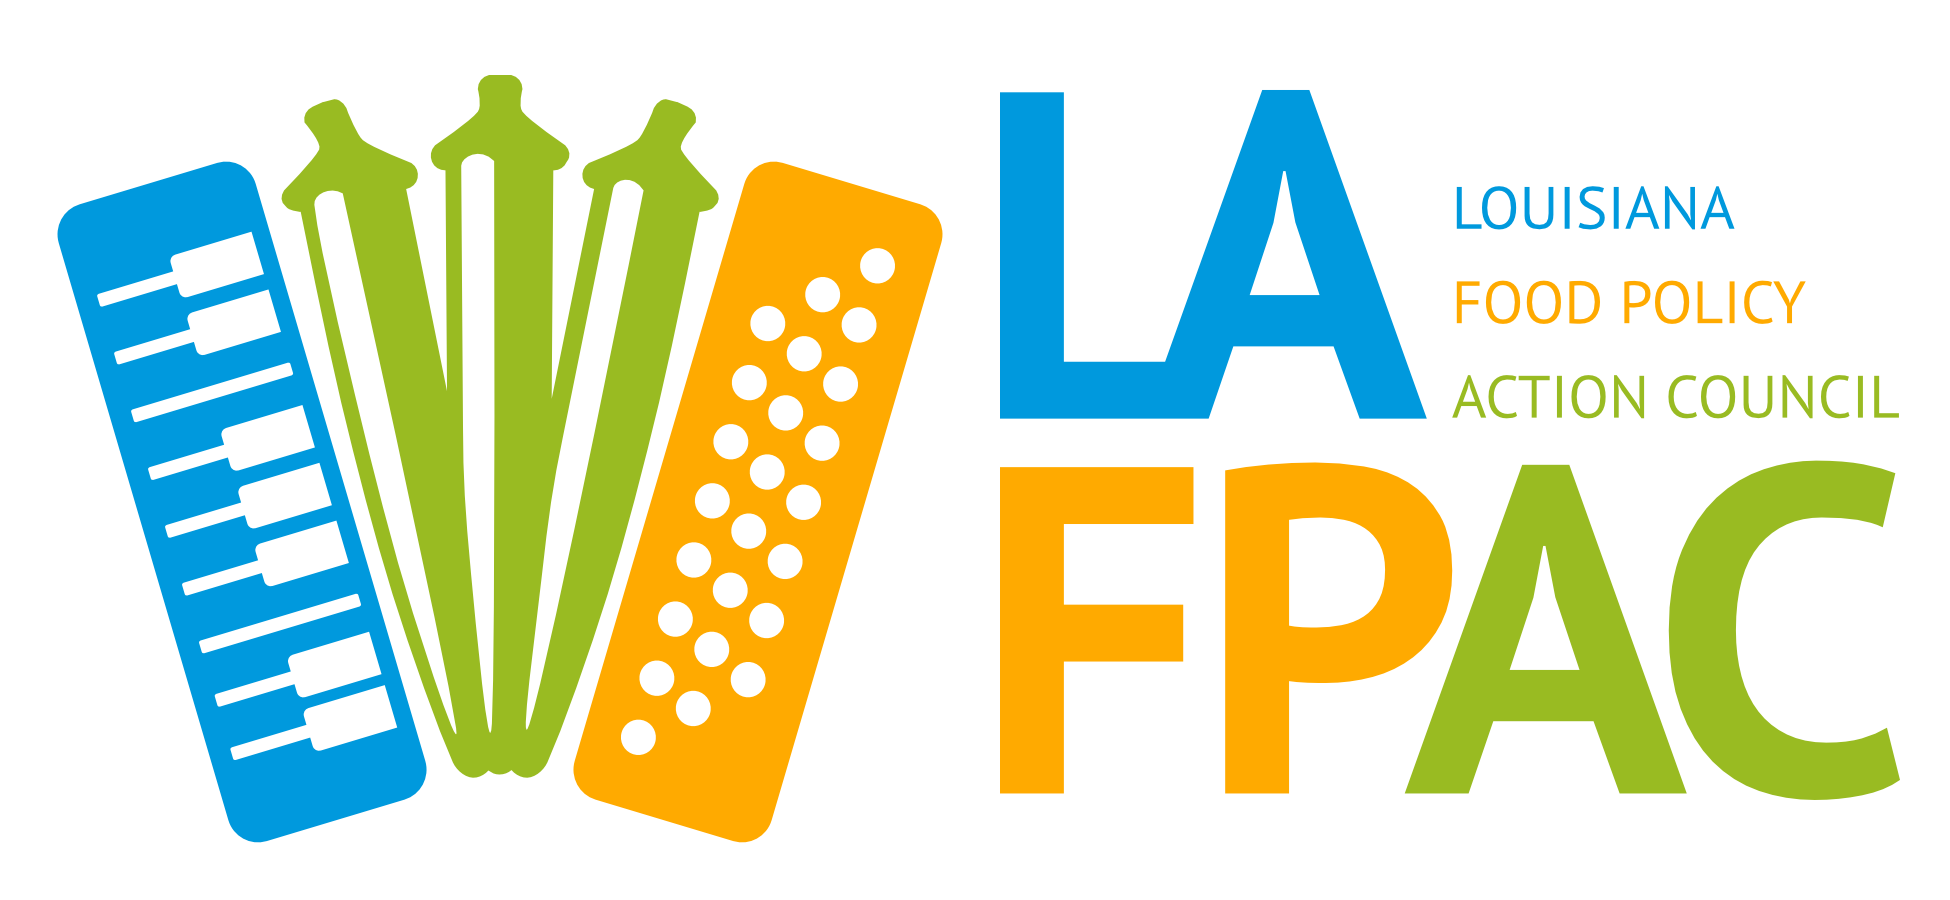 Louisiana Food Policy Action Council